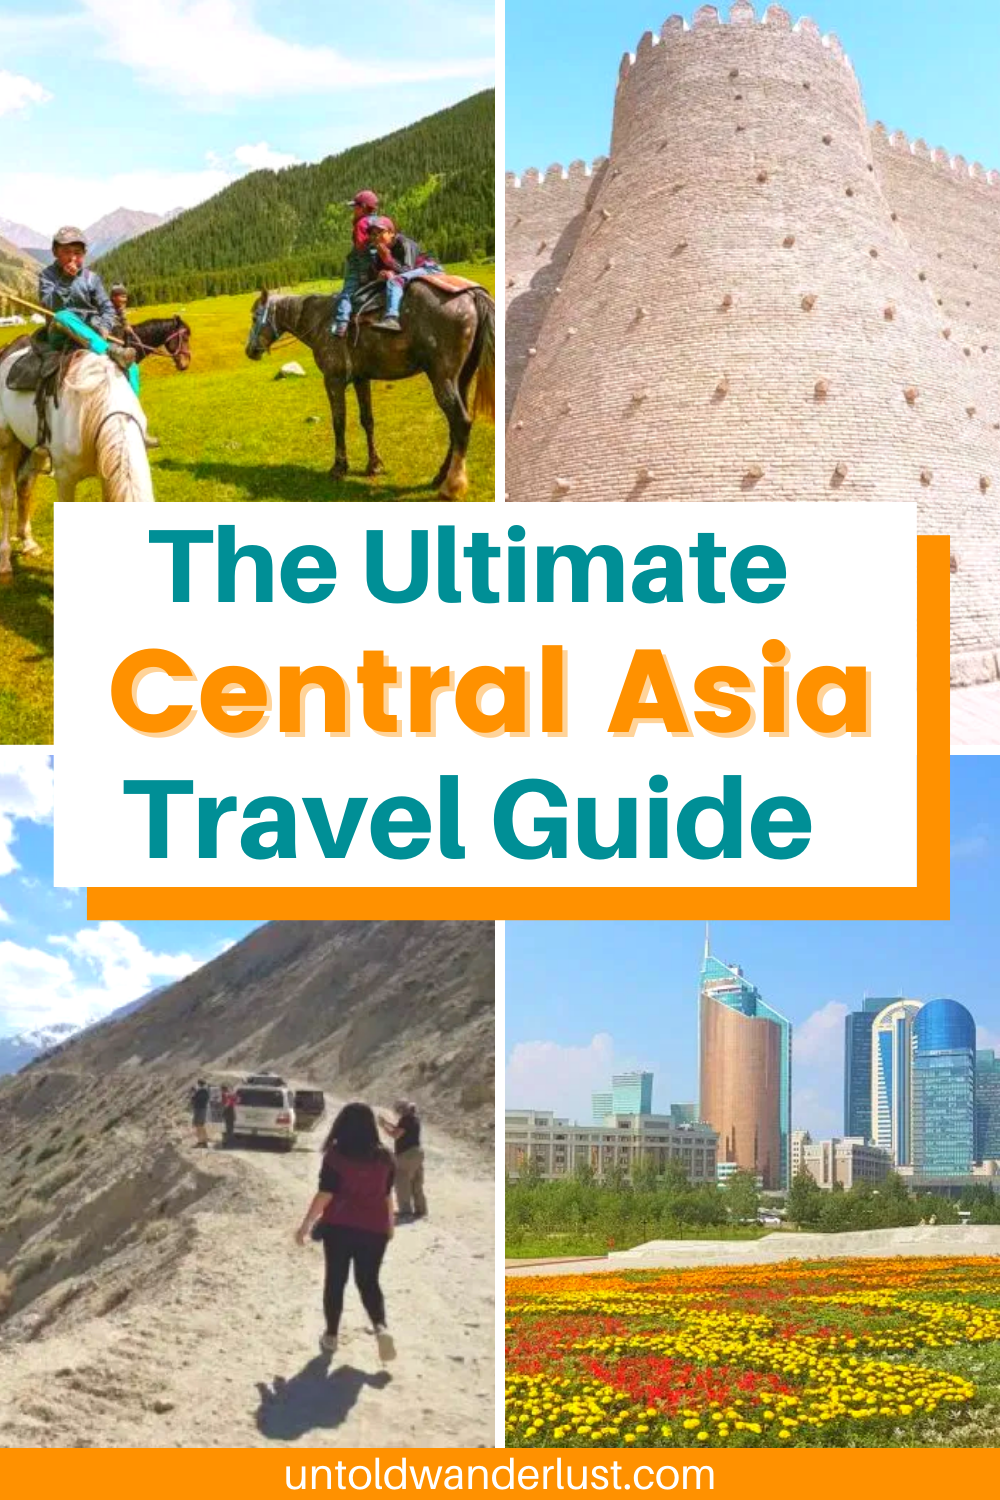 The Ultimate Central Asia Travel Guide